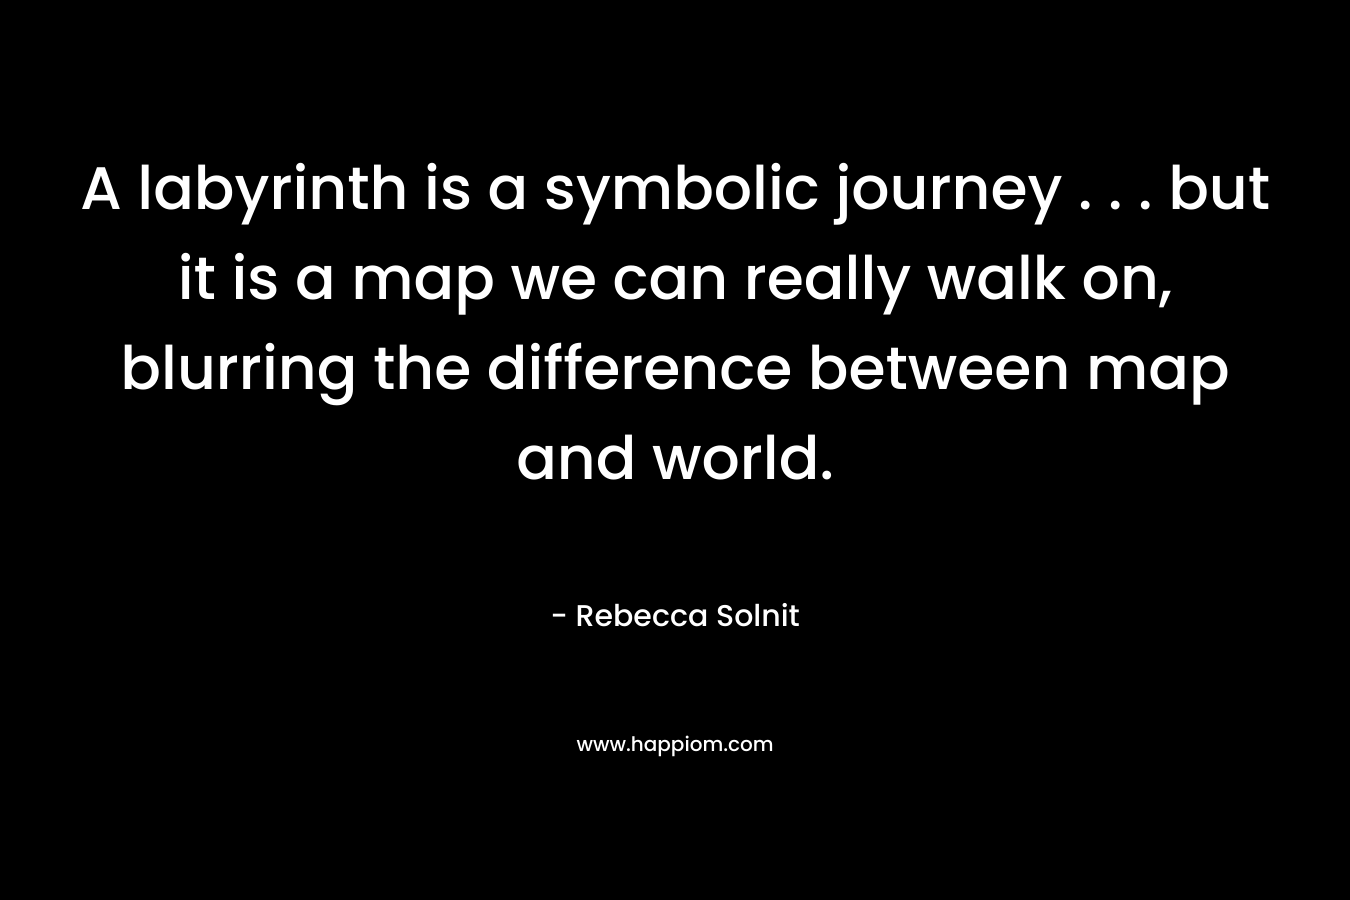 A labyrinth is a symbolic journey . . . but it is a map we can really walk on, blurring the difference between map and world. – Rebecca Solnit